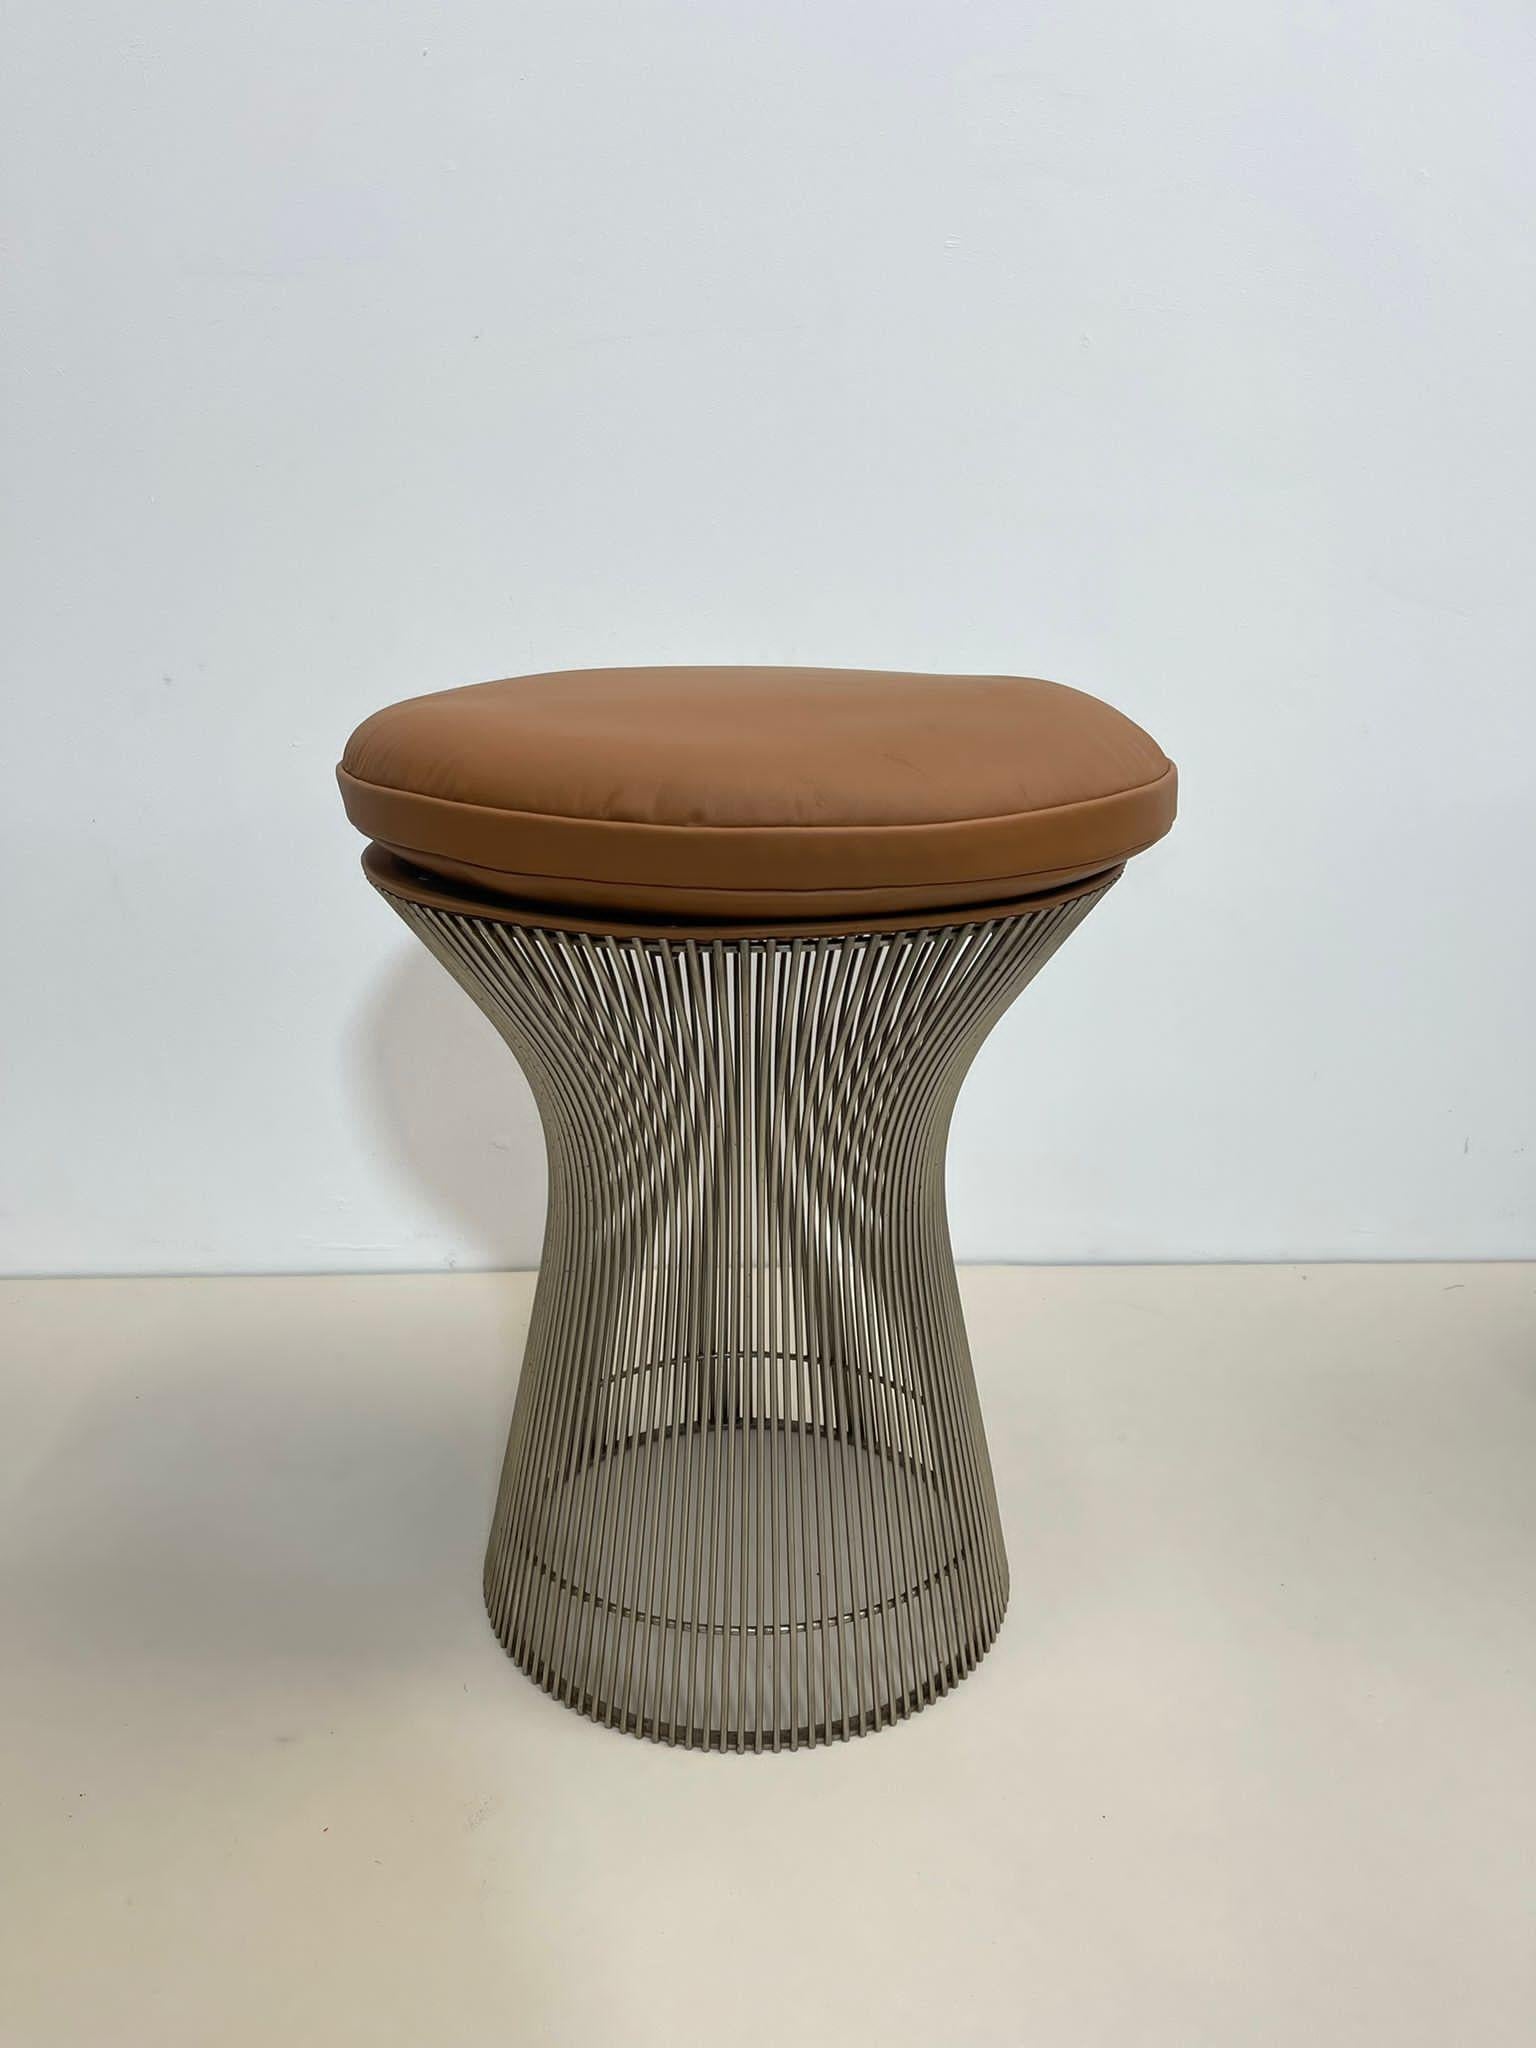 Mid-20th Century Warren Platner Wire Stools for Knoll, 1960s, 5 Available For Sale